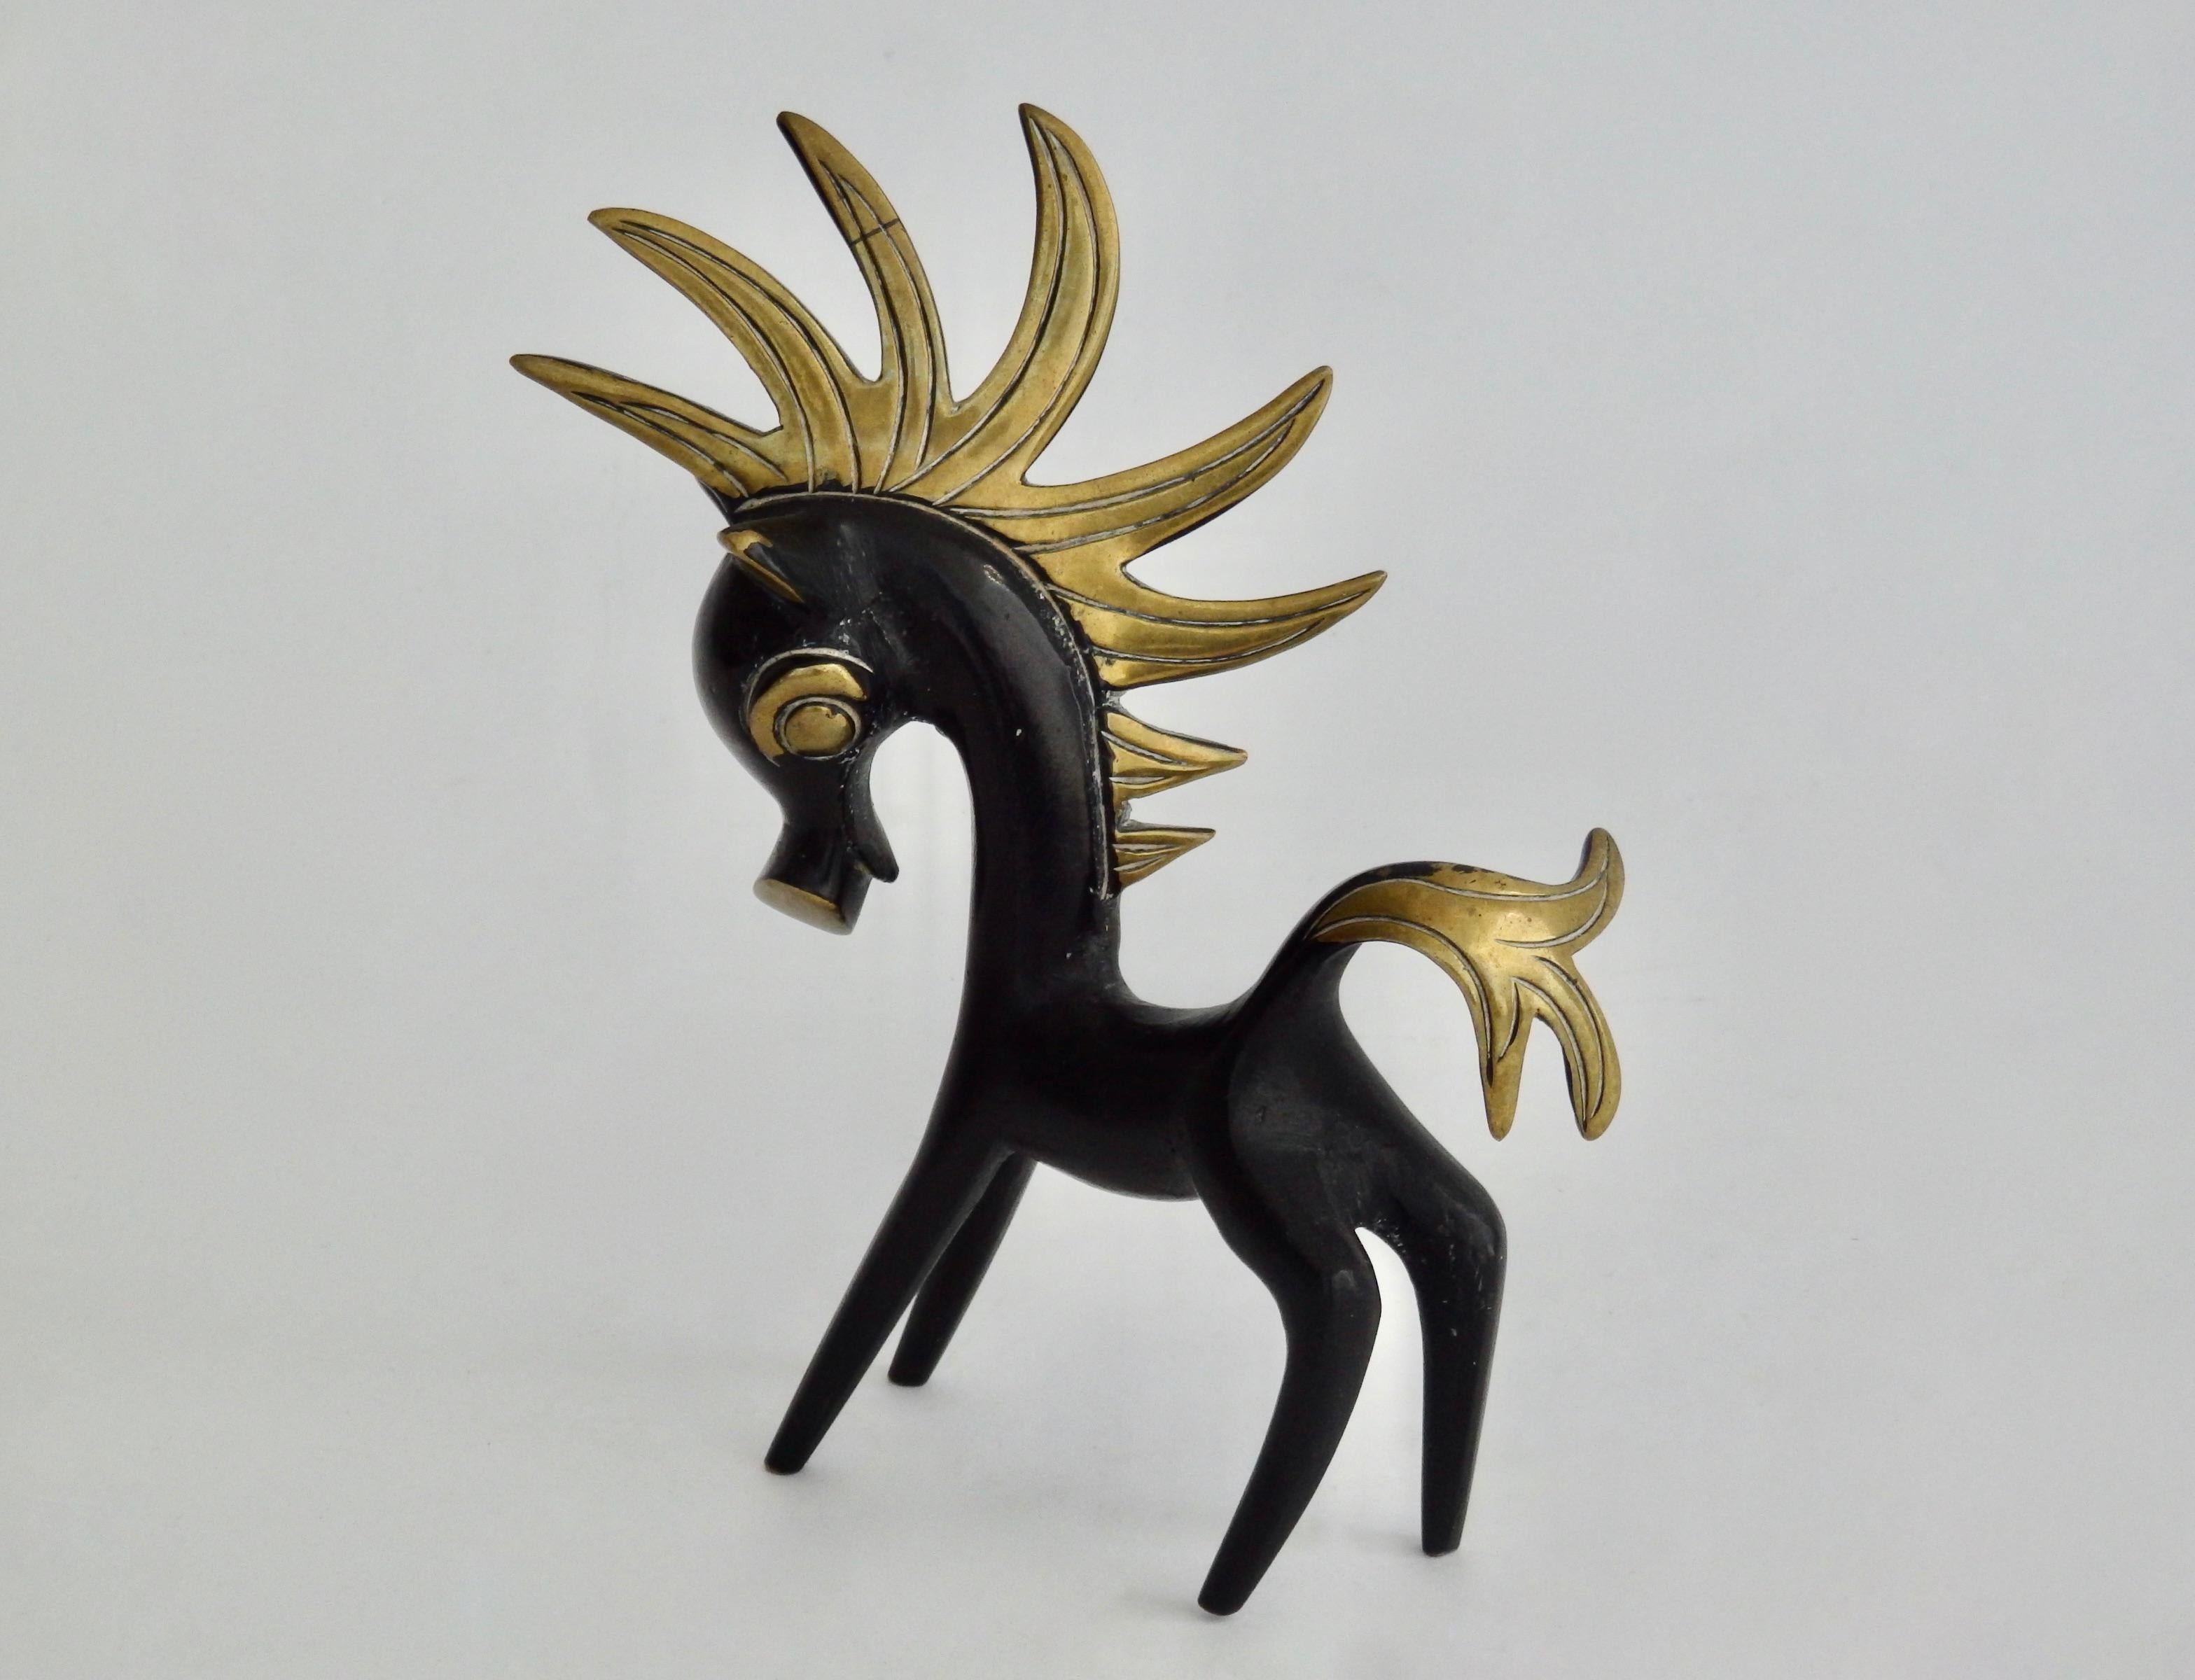 A solid brass with patina'd accents charming horse figurine in the style of Walter Bosse.
5.38